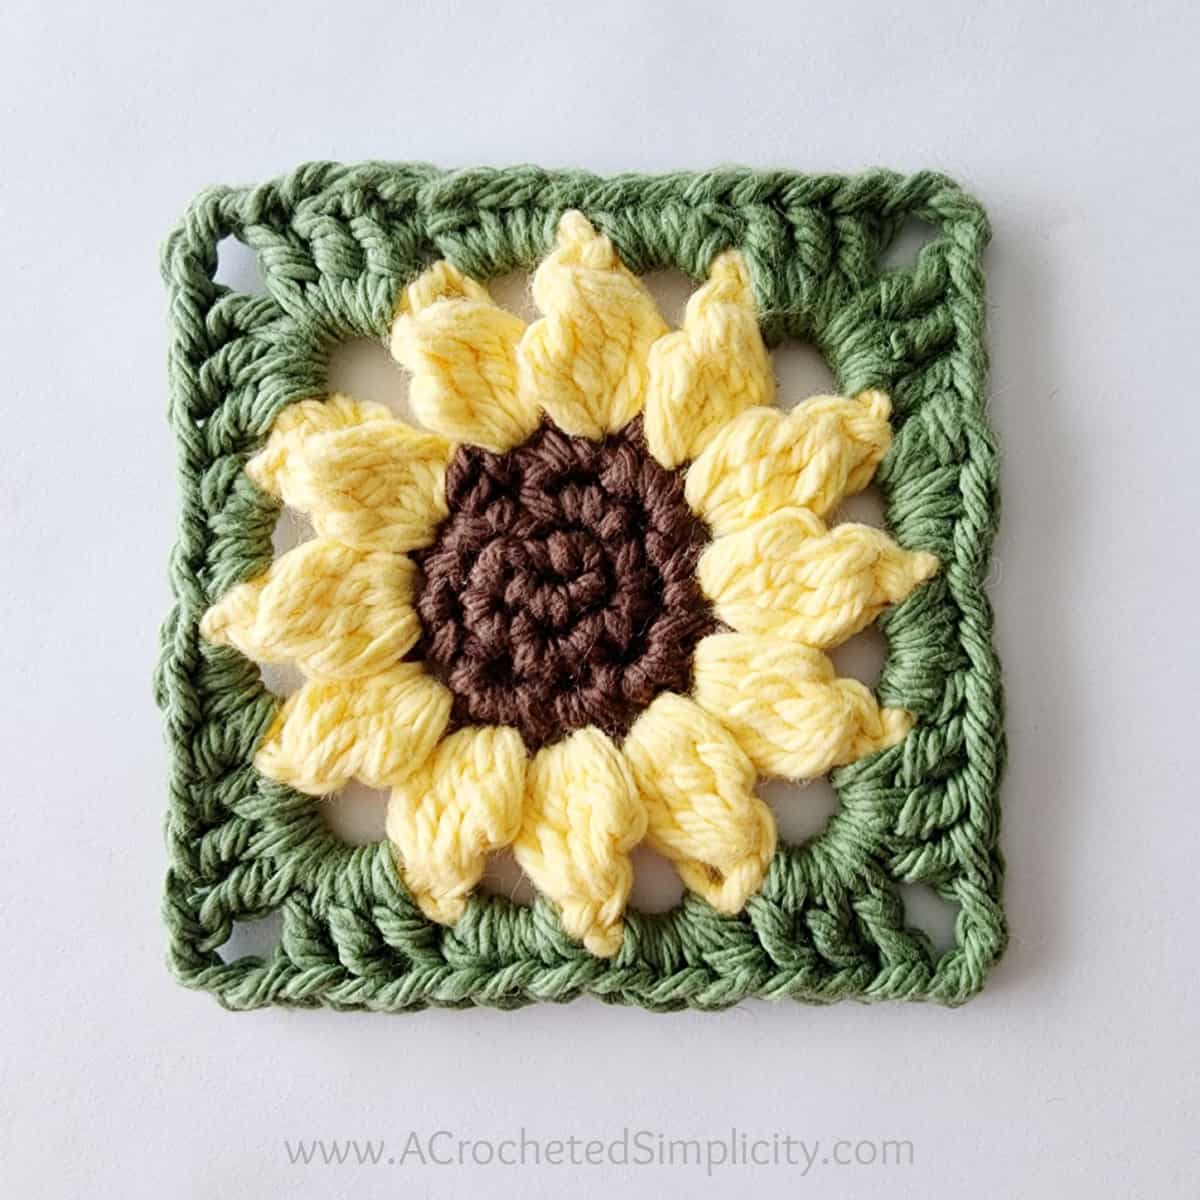 One completed crochet sunflower motif square.